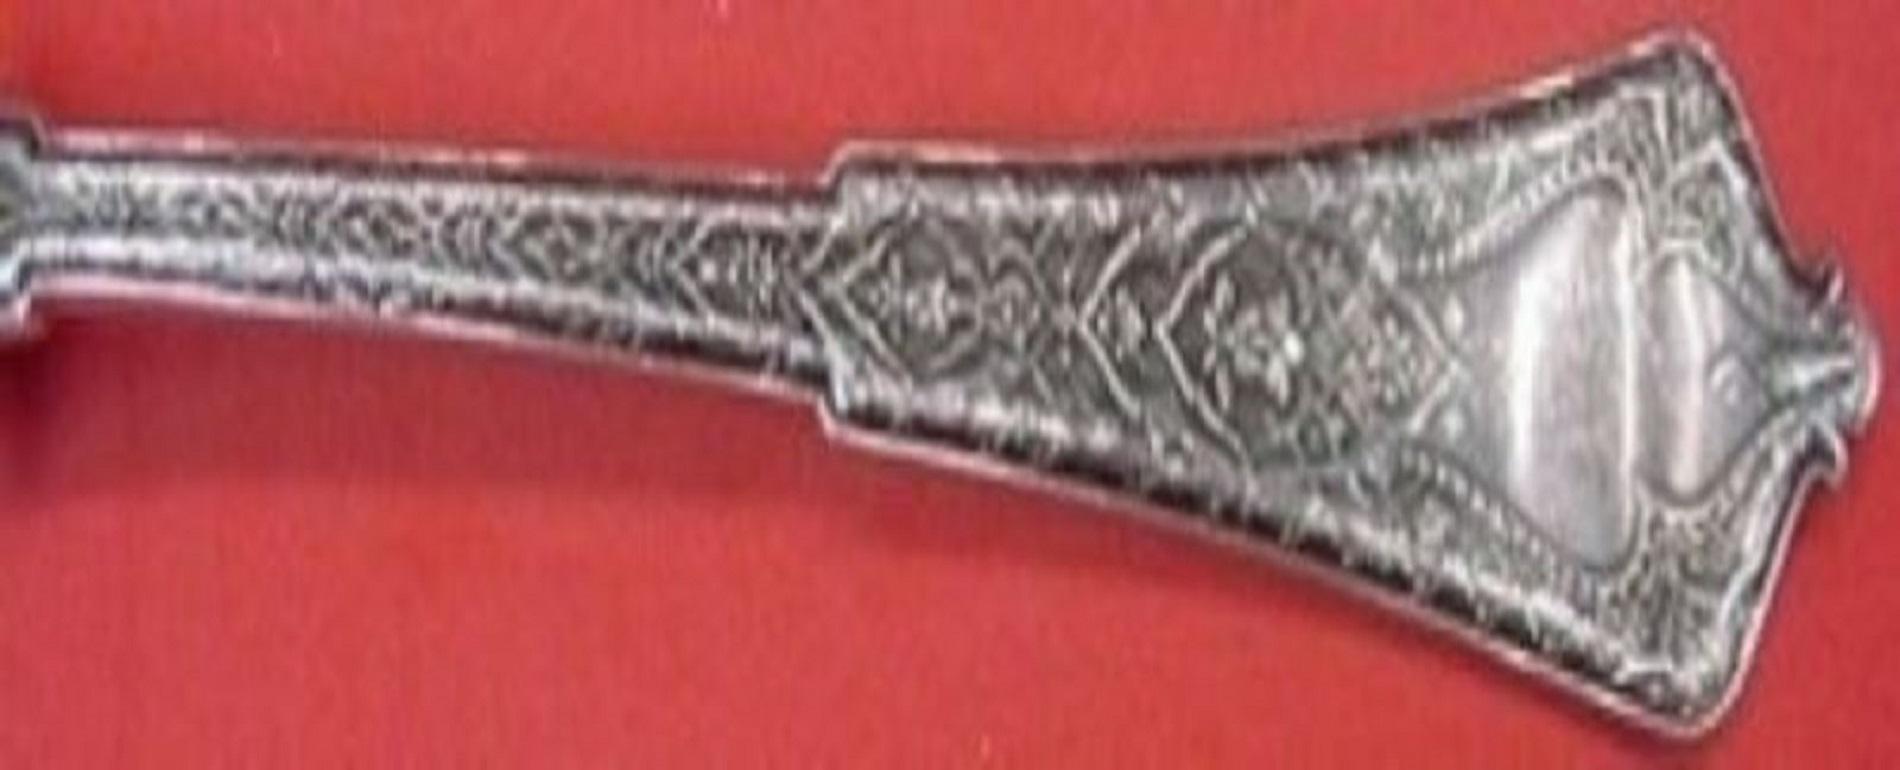 Sterling silver flat handle all-sterling fish knife, 8 3/4